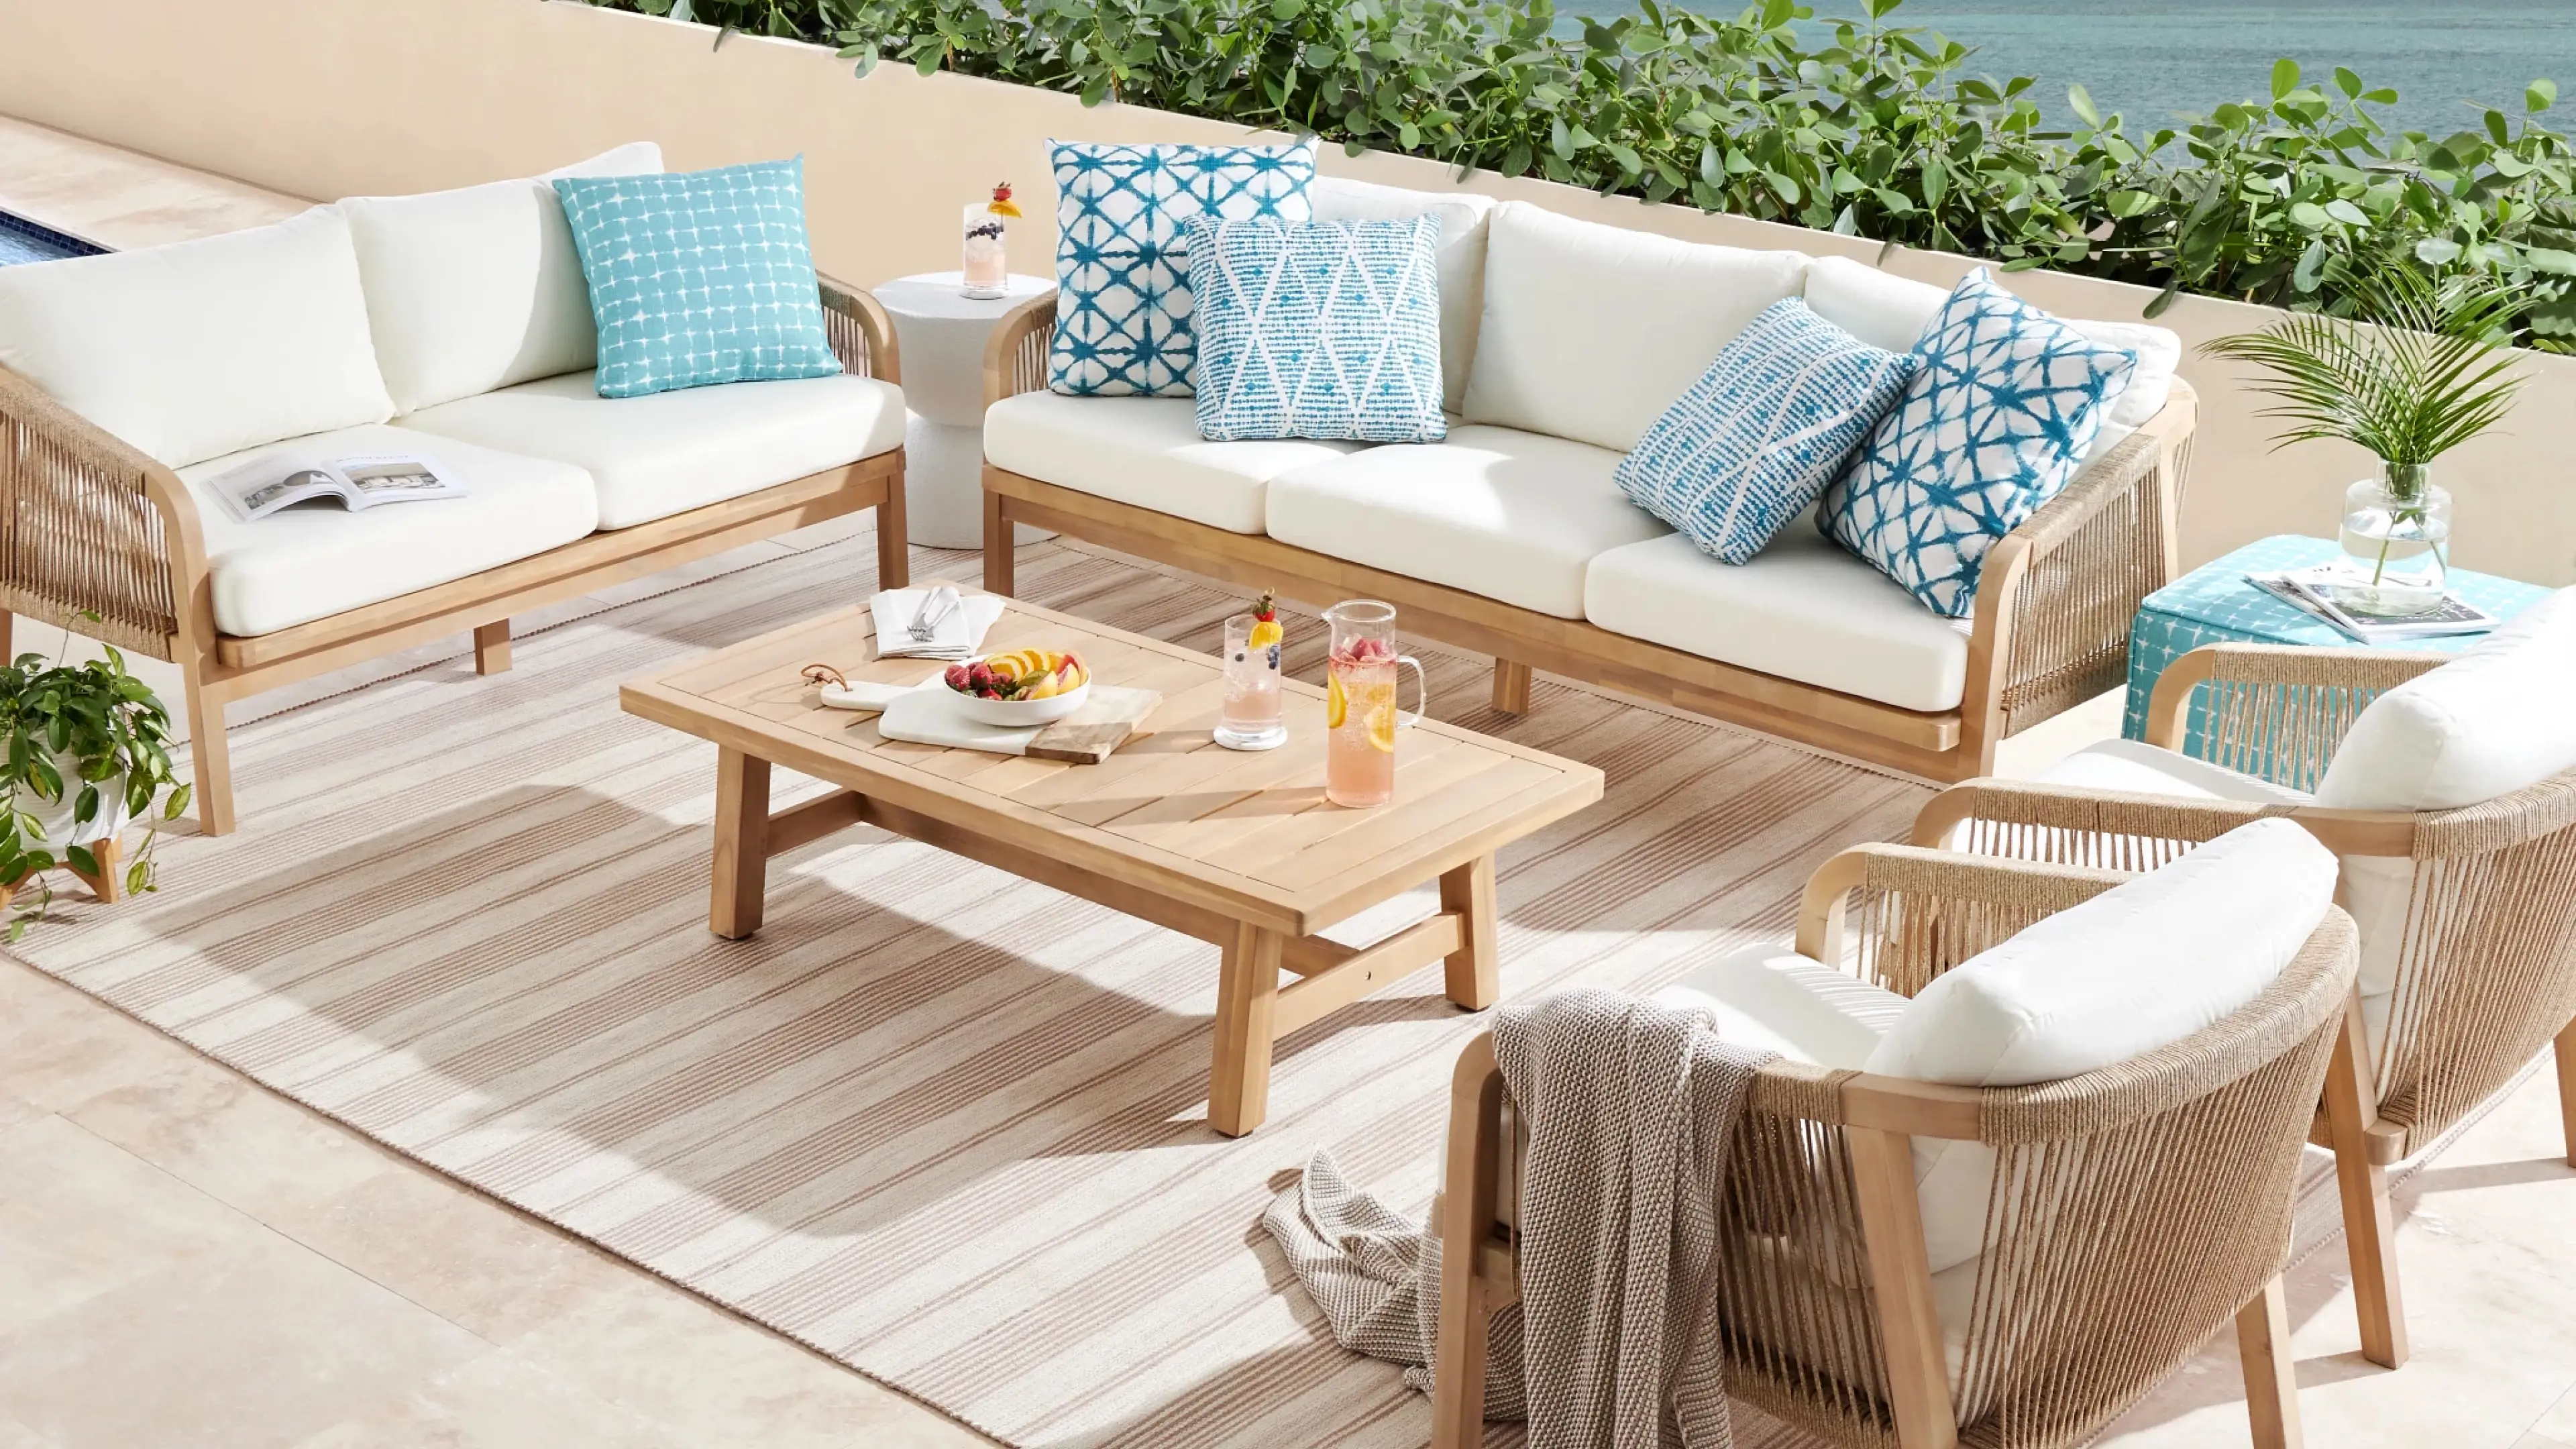 Enhance Your Outdoor Oasis with Stylish Outdoor Area Rugs